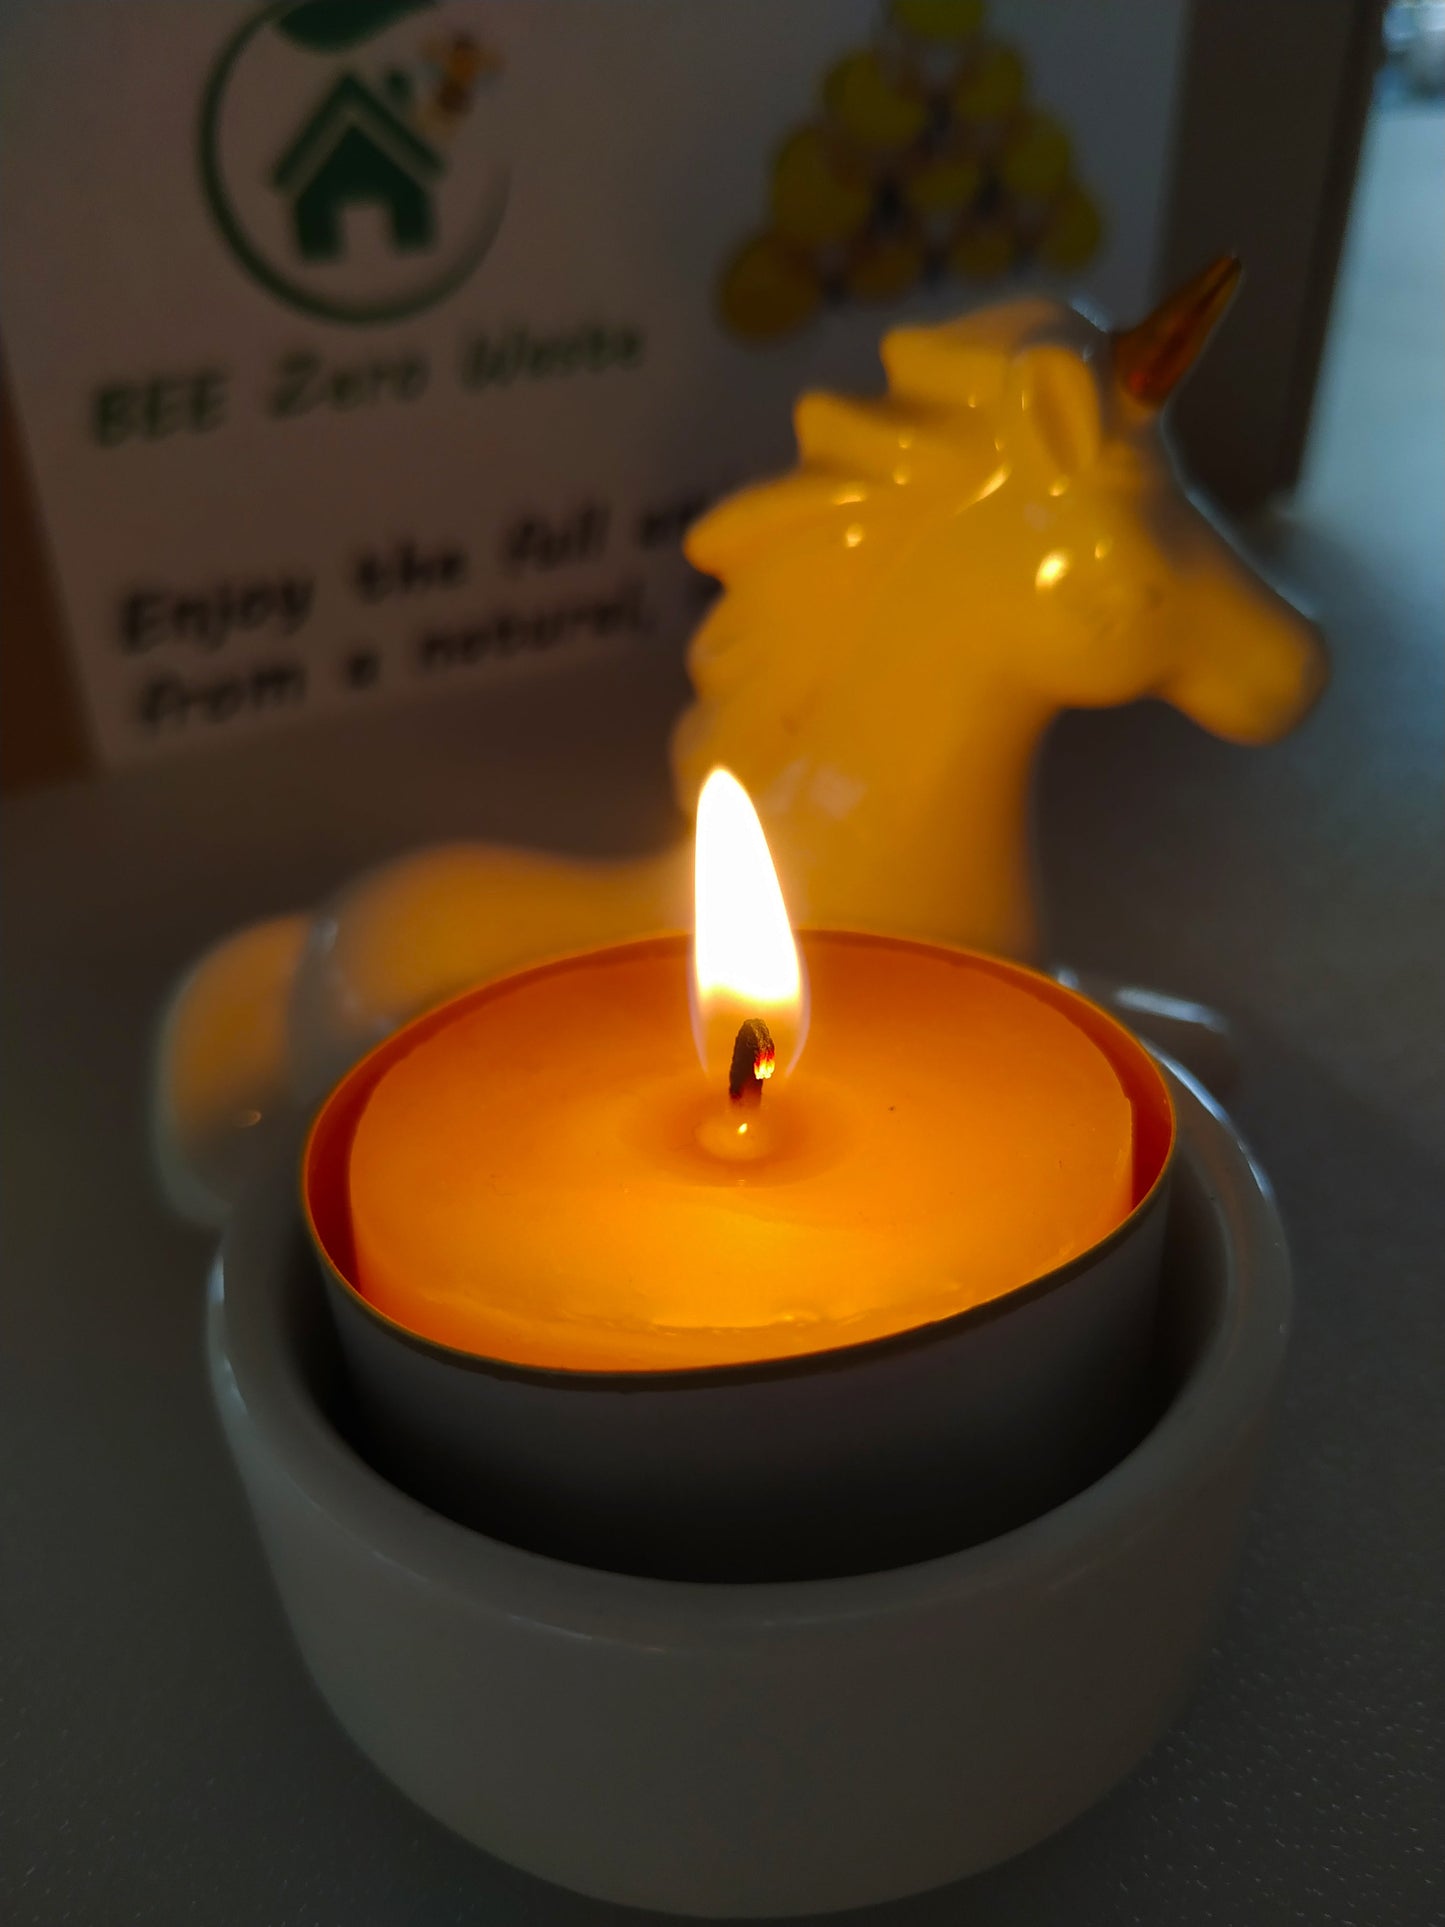 Beeswax tealights, Hand poured in the UK, natural tea candles, 100% beeswax-various packs & refills - BEE Zero Waste